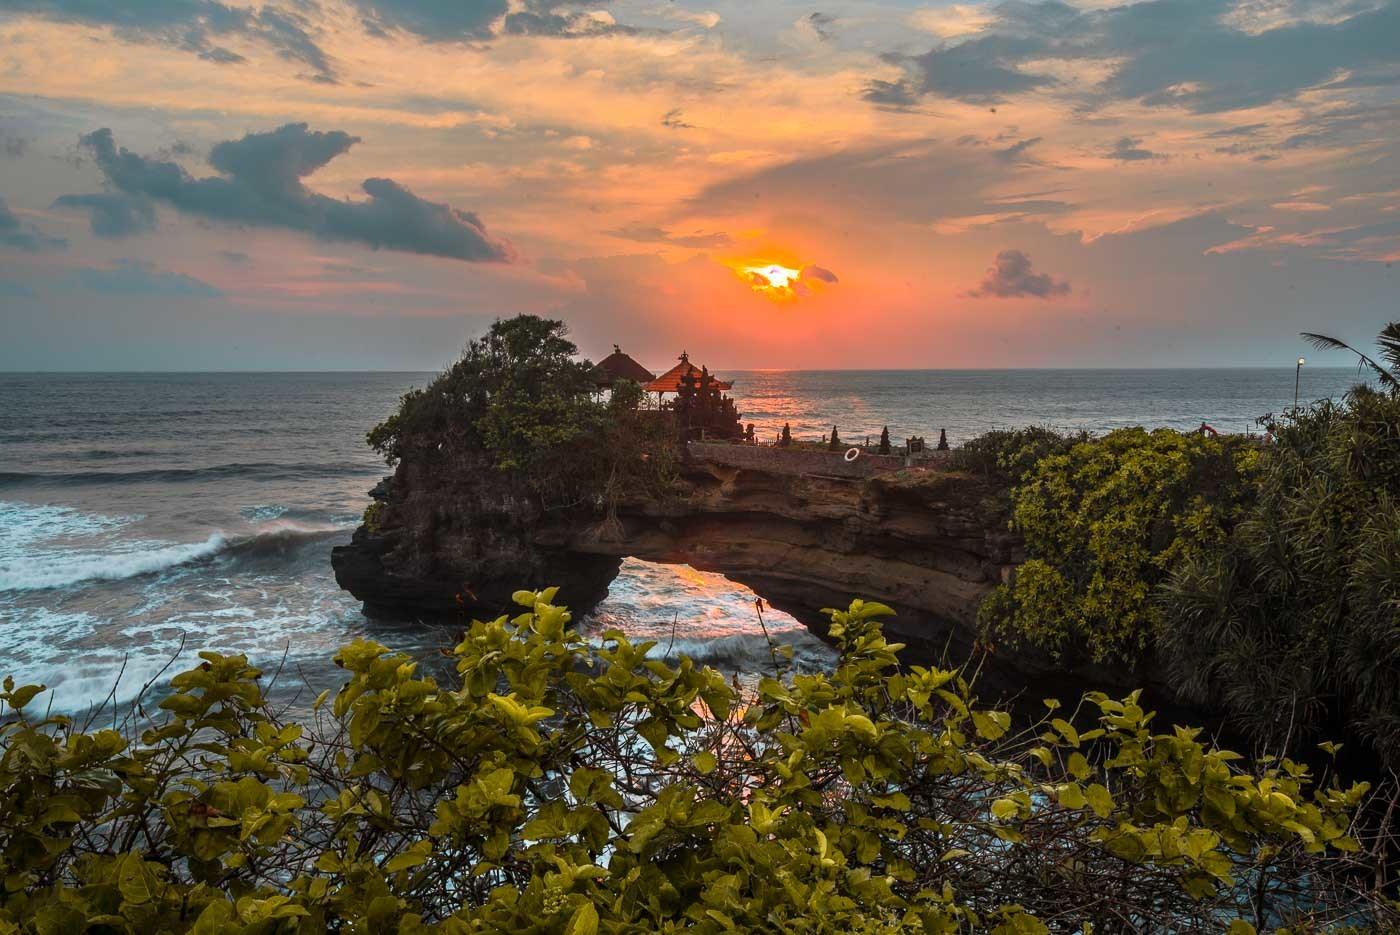 the-ultimate-bali-itinerary-how-to-plan-the-perfect-trip-to-bali-9 The Ultimate Bali Itinerary: How to Plan the Perfect Trip to Bali